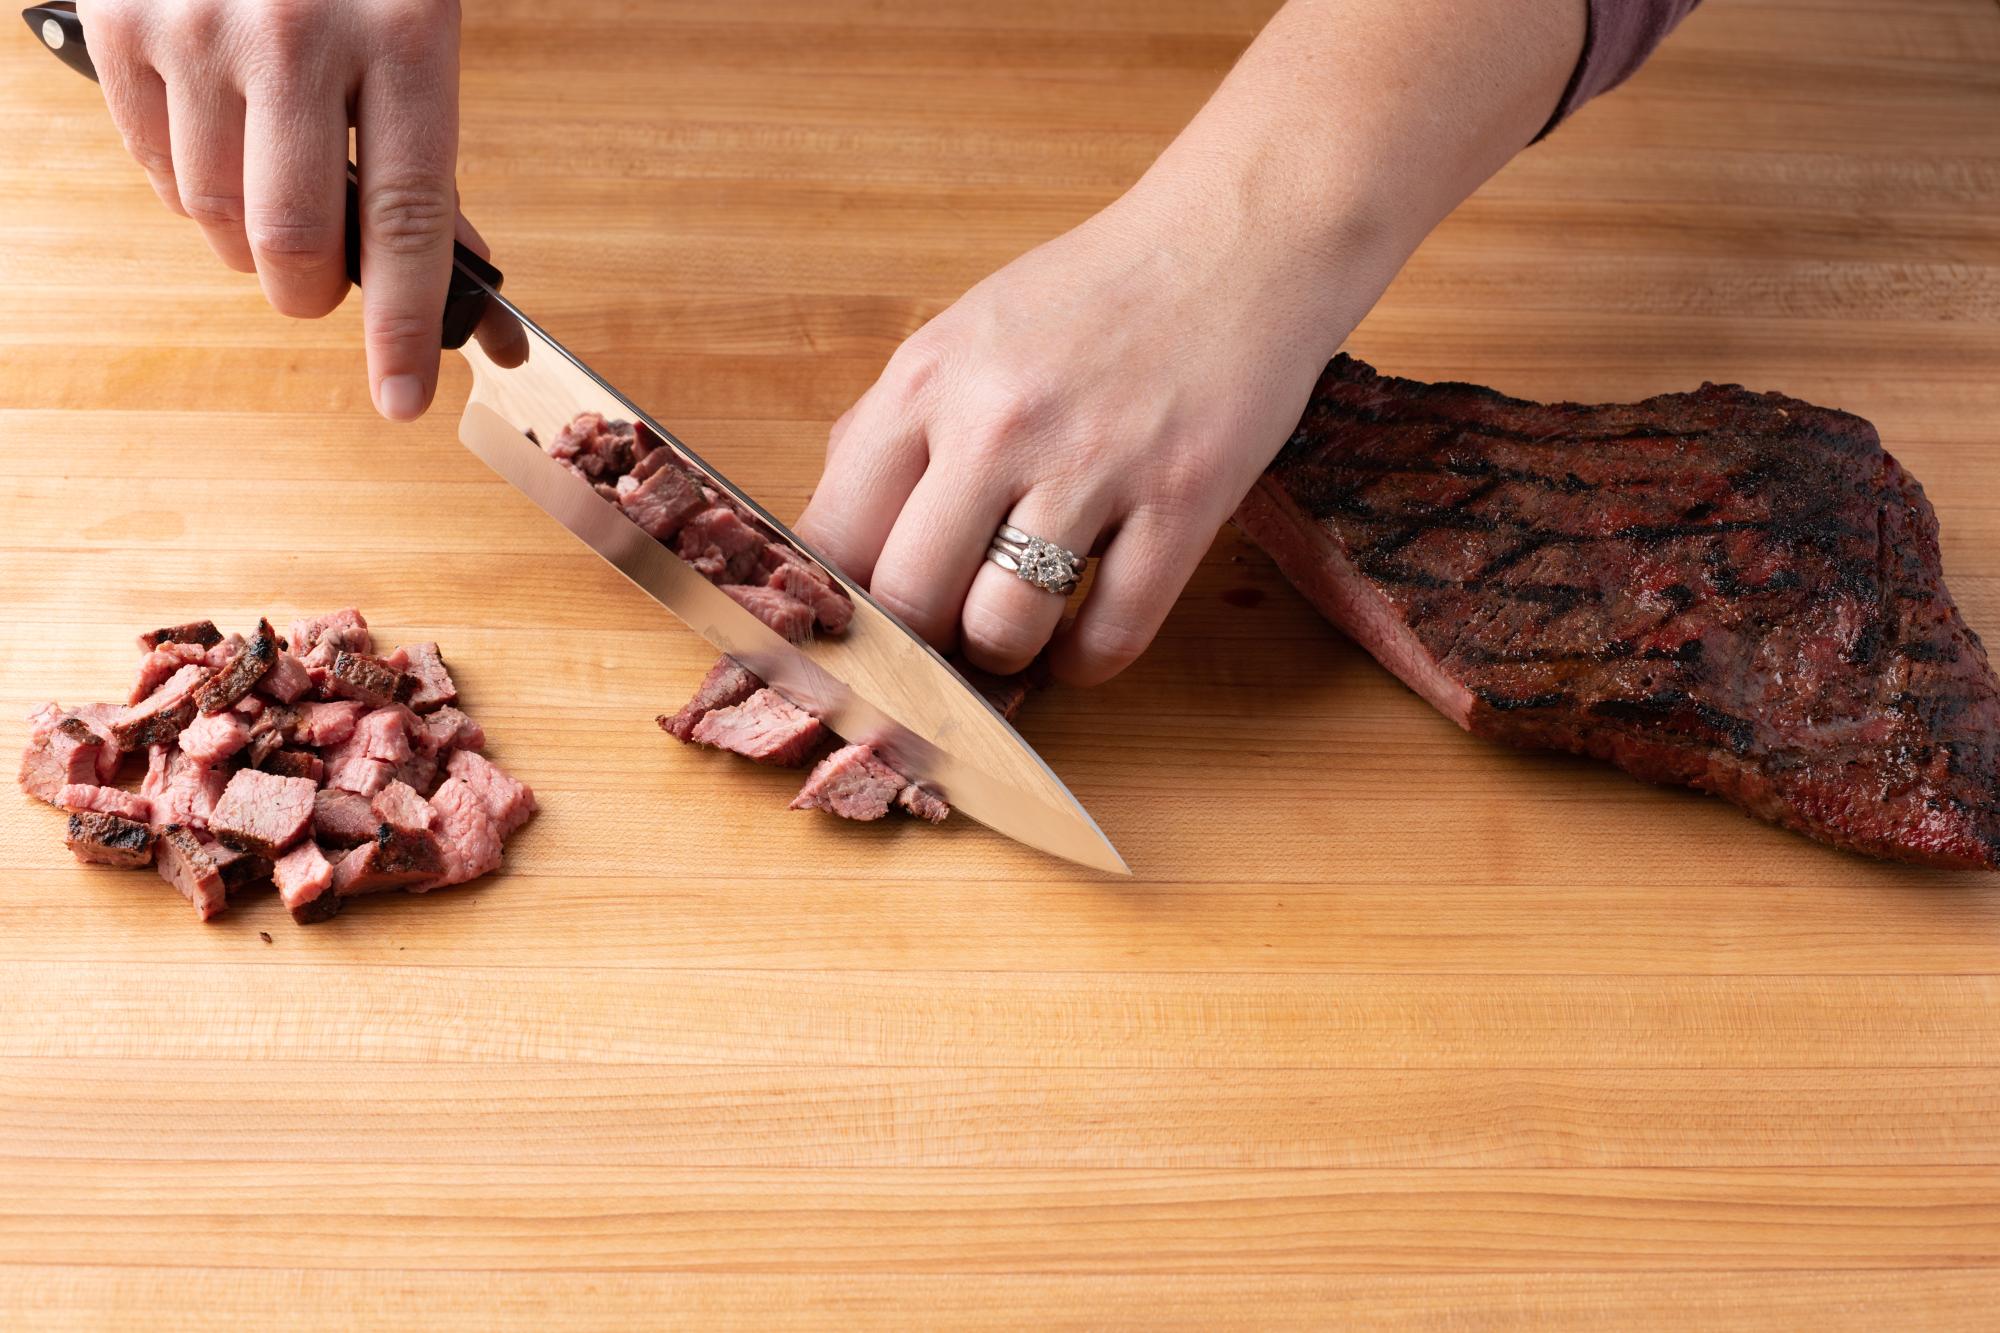 Petite Chef is perfect for dicing up the leftover tri-tip